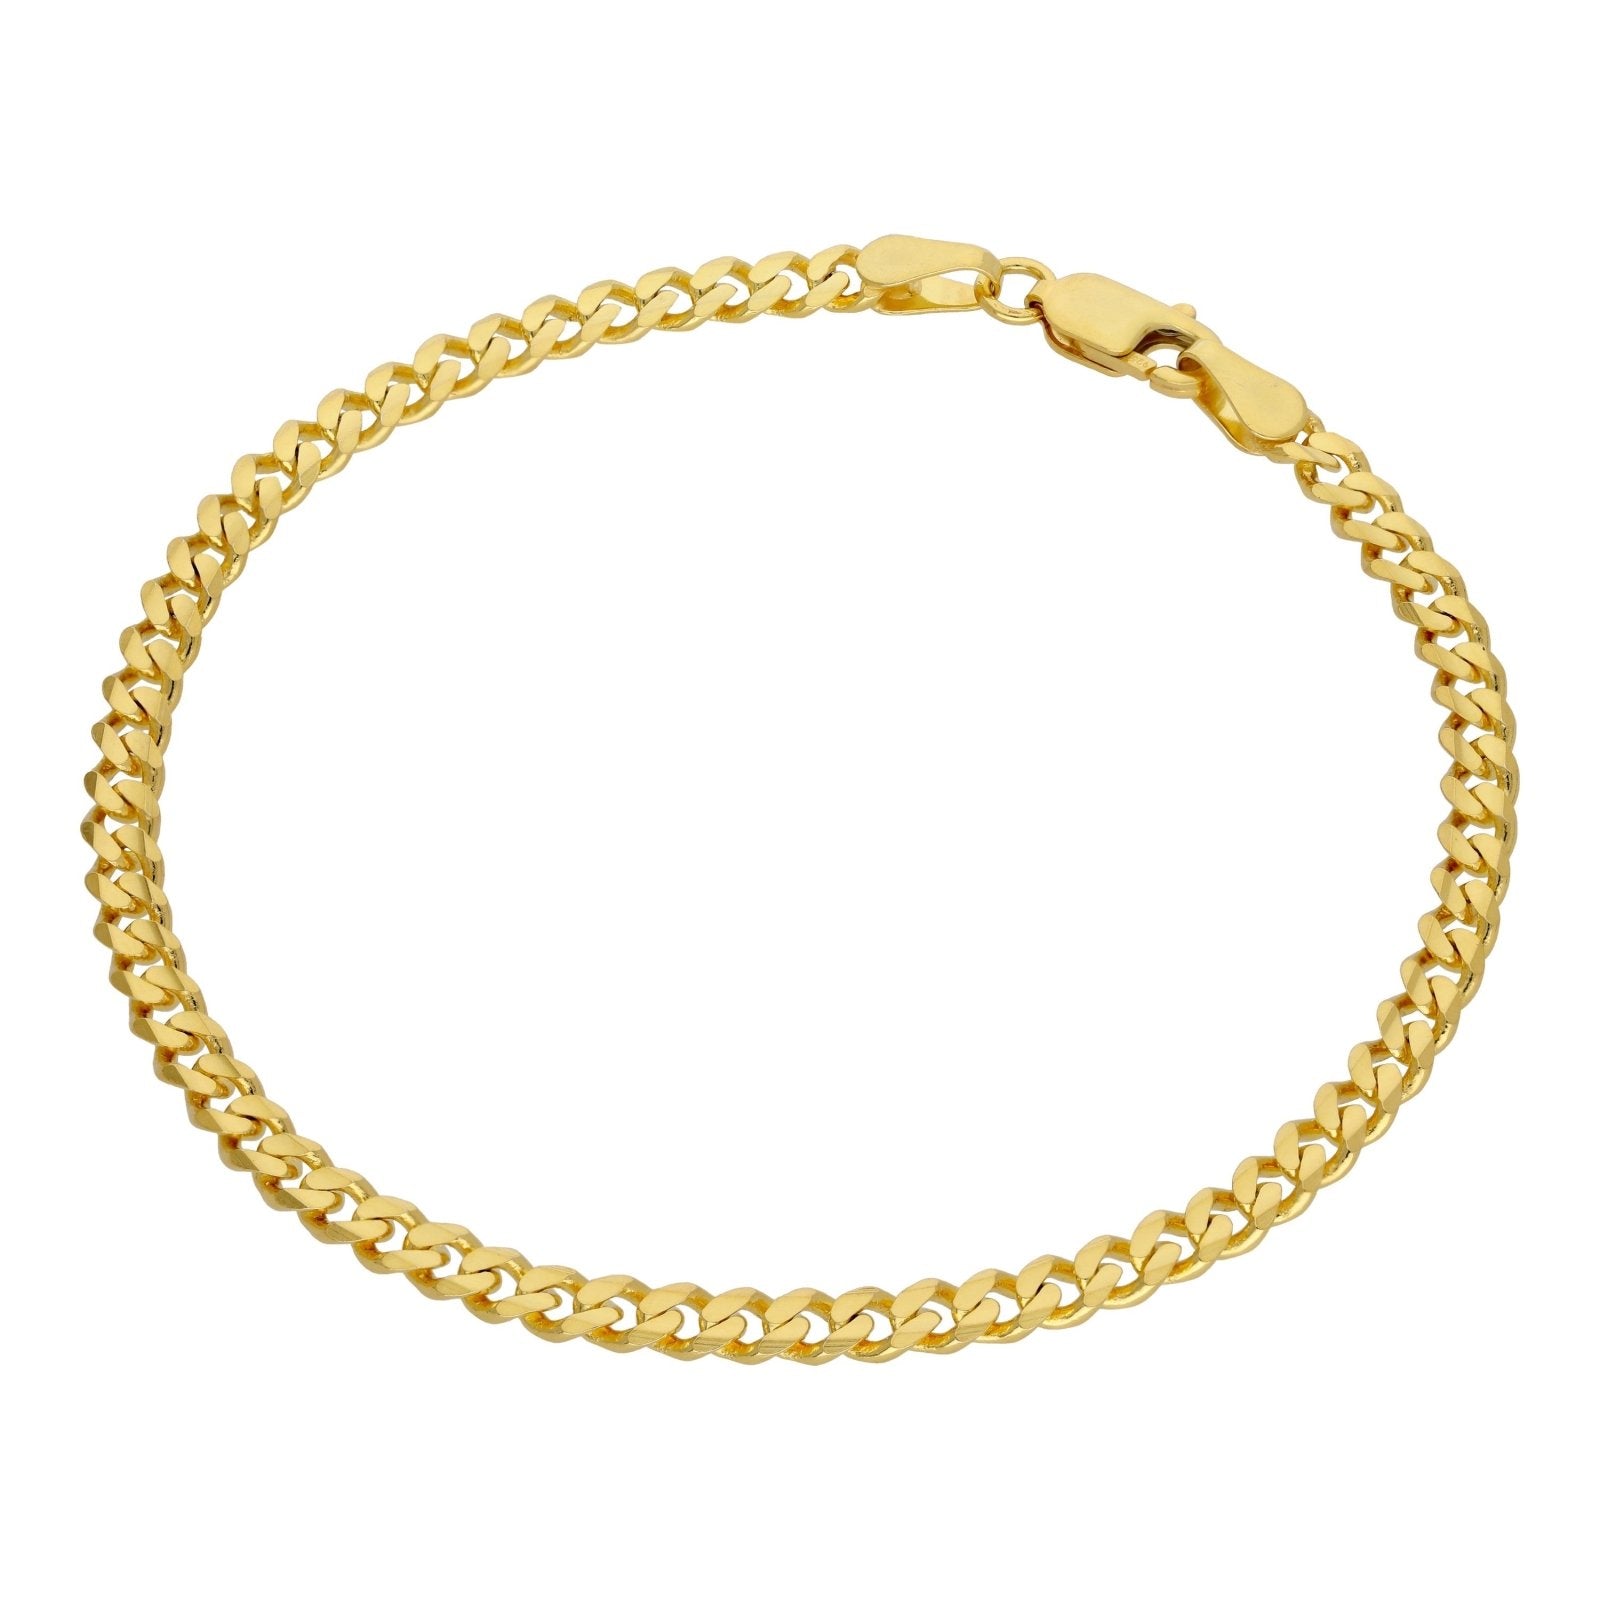 Gold Plated Sterling Silver 3.5mm Curb Bracelet 7 Inches - jewellerybox